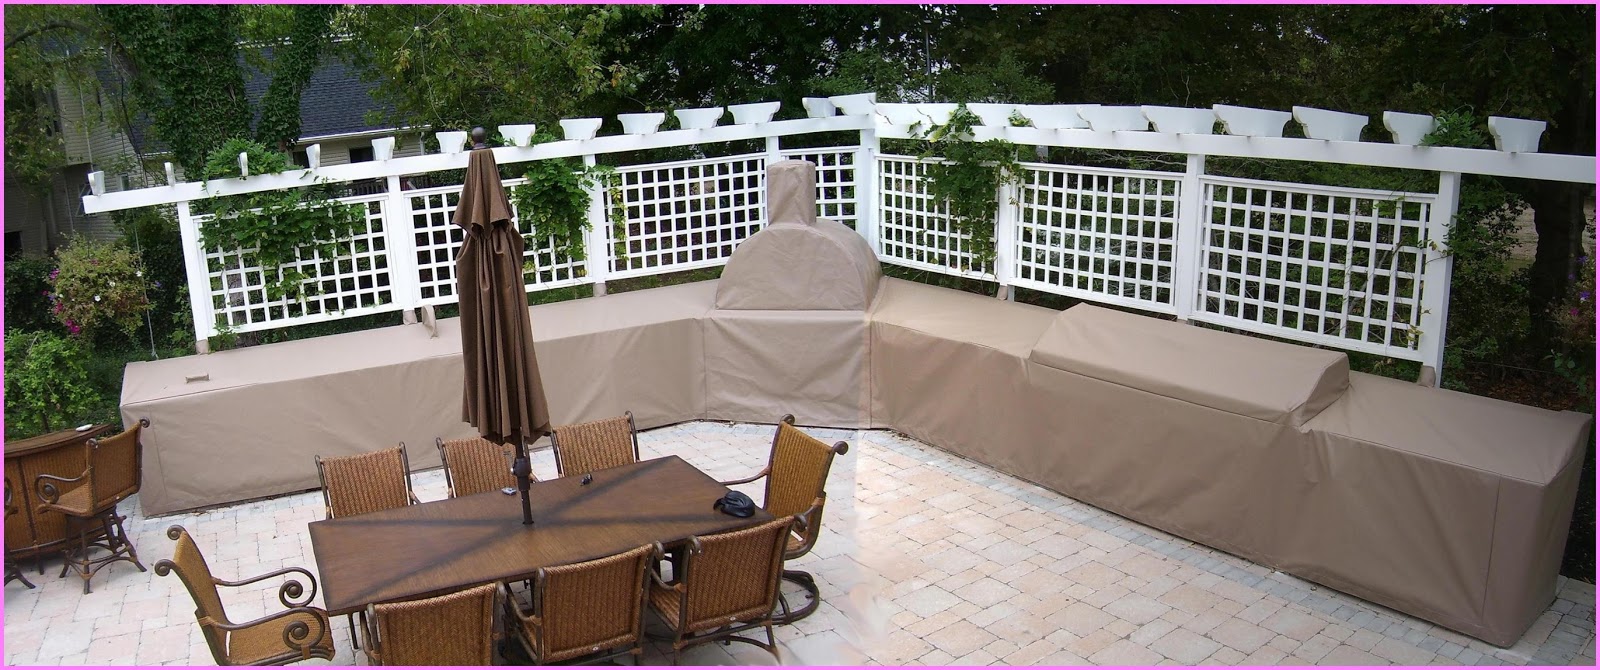 7 Outdoor Kitchen Covers Outdoor Kitchen Covers Custom Kitchen Covers Grill Covers  Outdoor,Kitchen,Covers